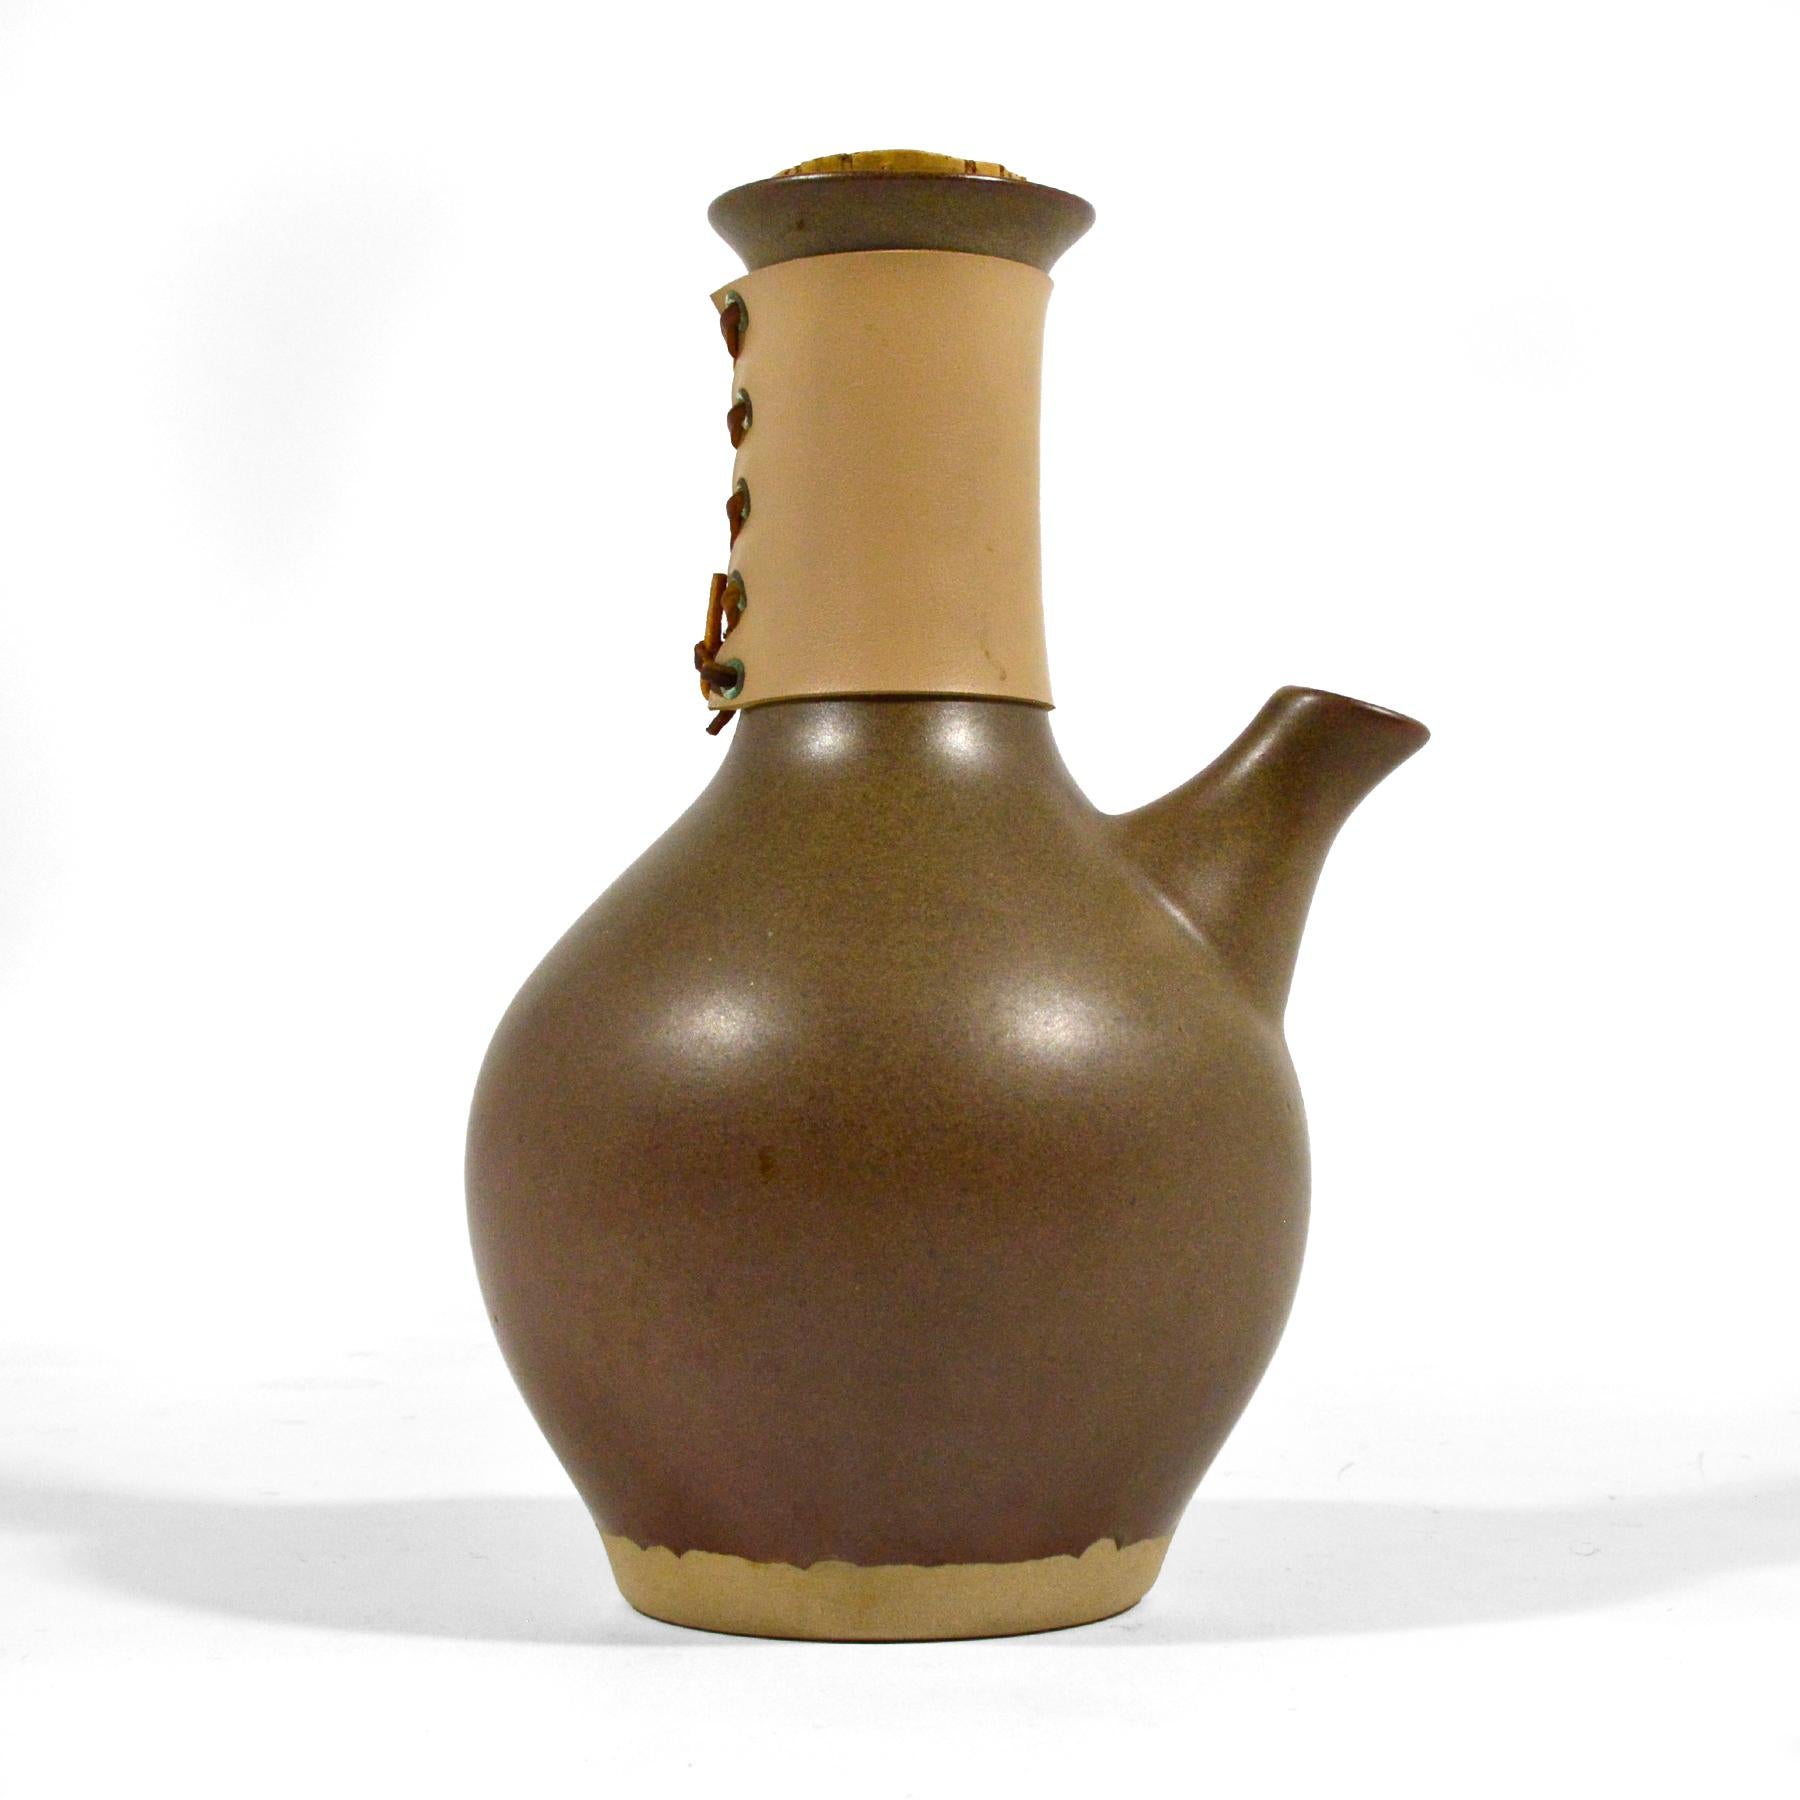 Beautiful in form and highly functional, this model M132 carafe/ coffee server by Gordon & Jane Martz for Marshall Studios has a great organic shape, is glazed in their signature subtle rabbit's fur glaze, and has a leather-wrapped handle. Perfectly